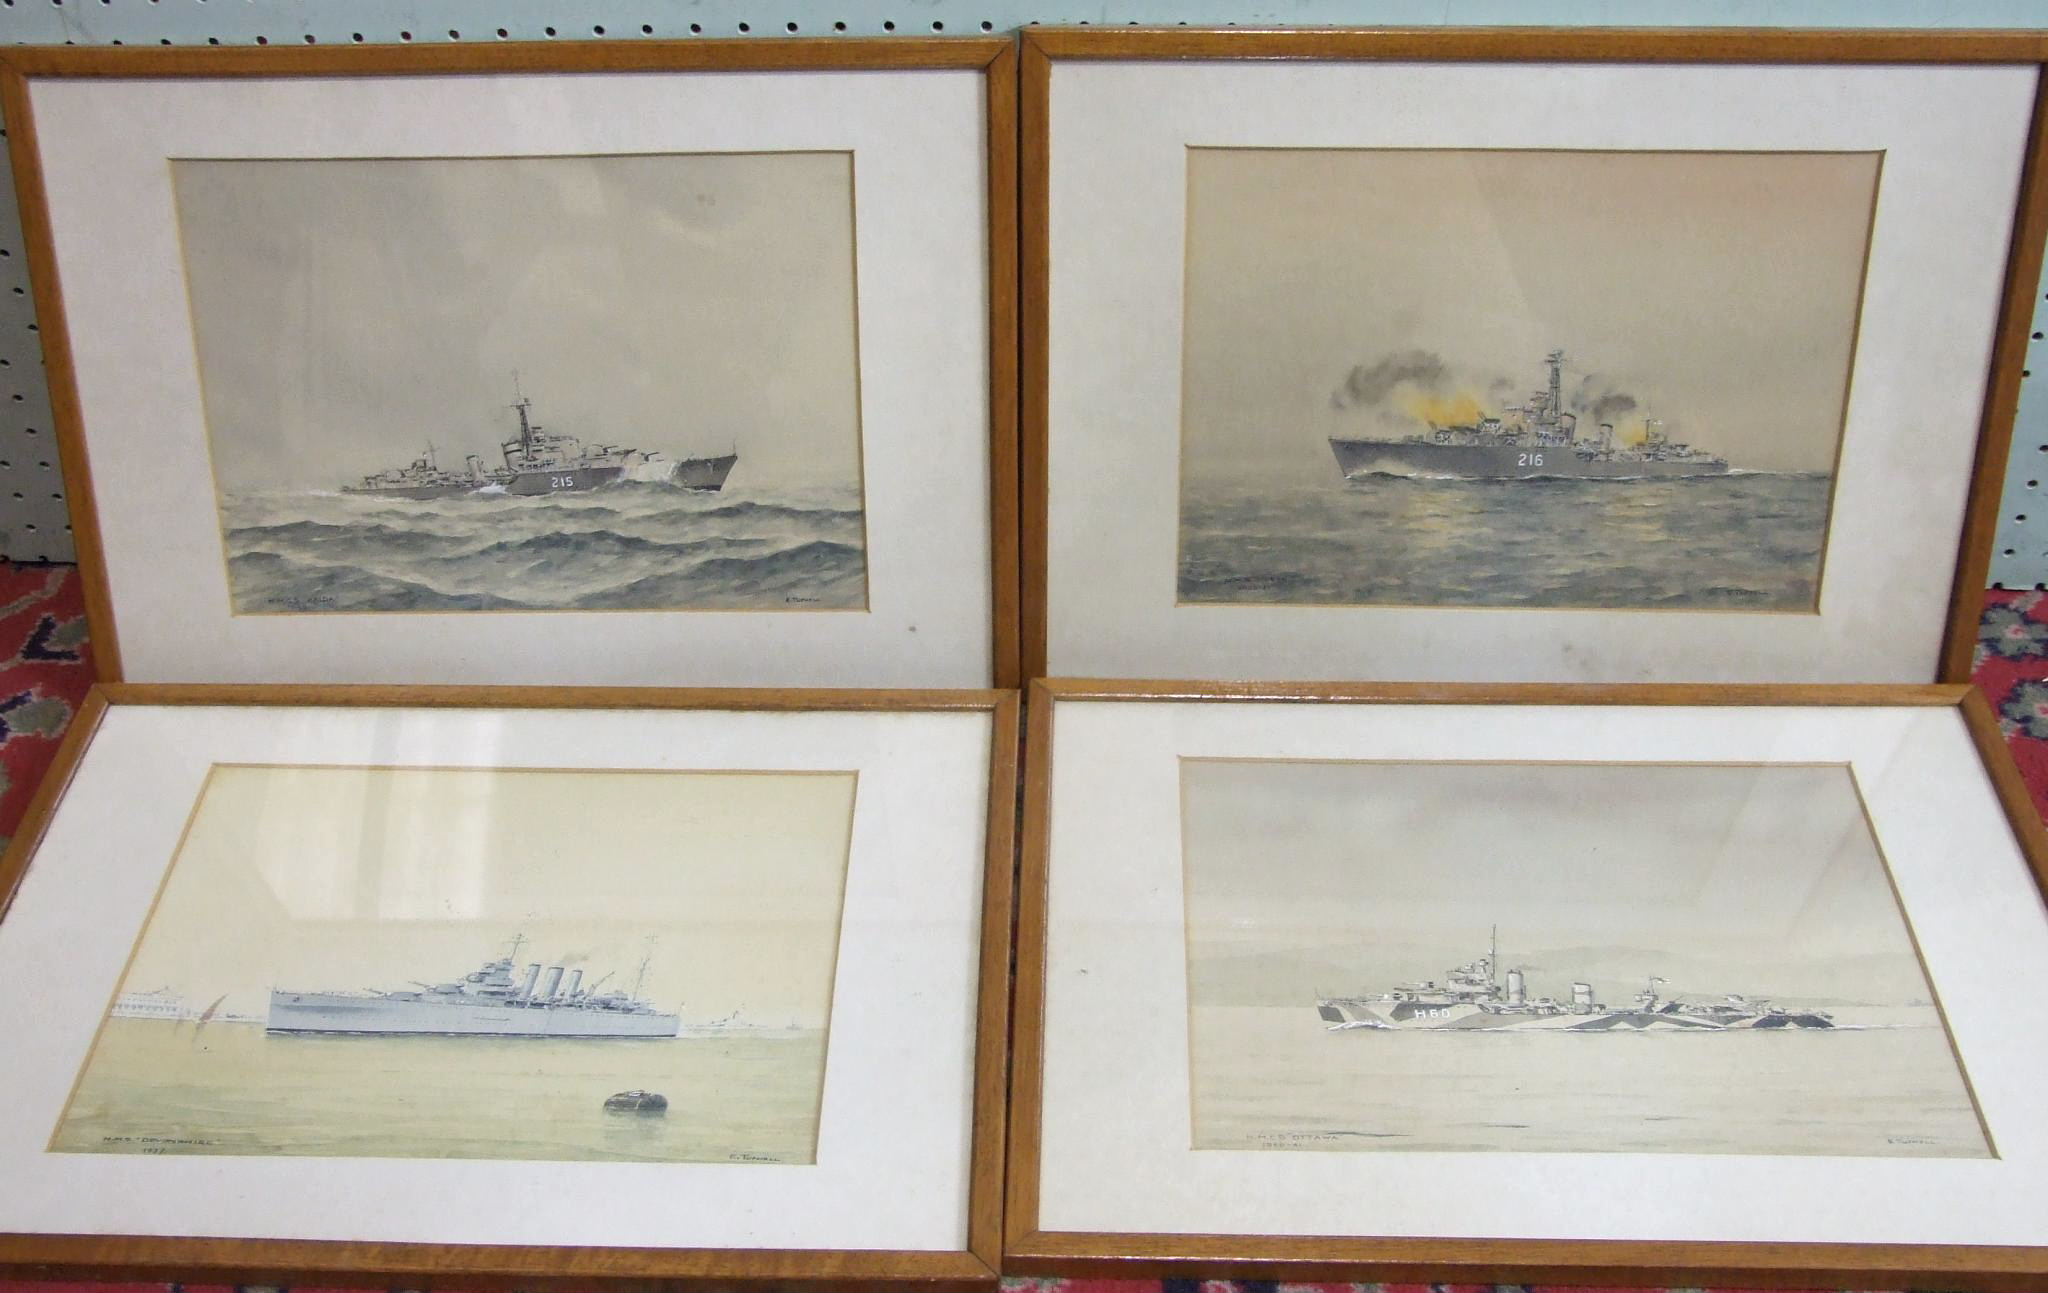 •Cdr Eric Erskine Campbell Tufnell RN (1888-1973), 'HMCS Ottawa', watercolour, signed and titled, 19